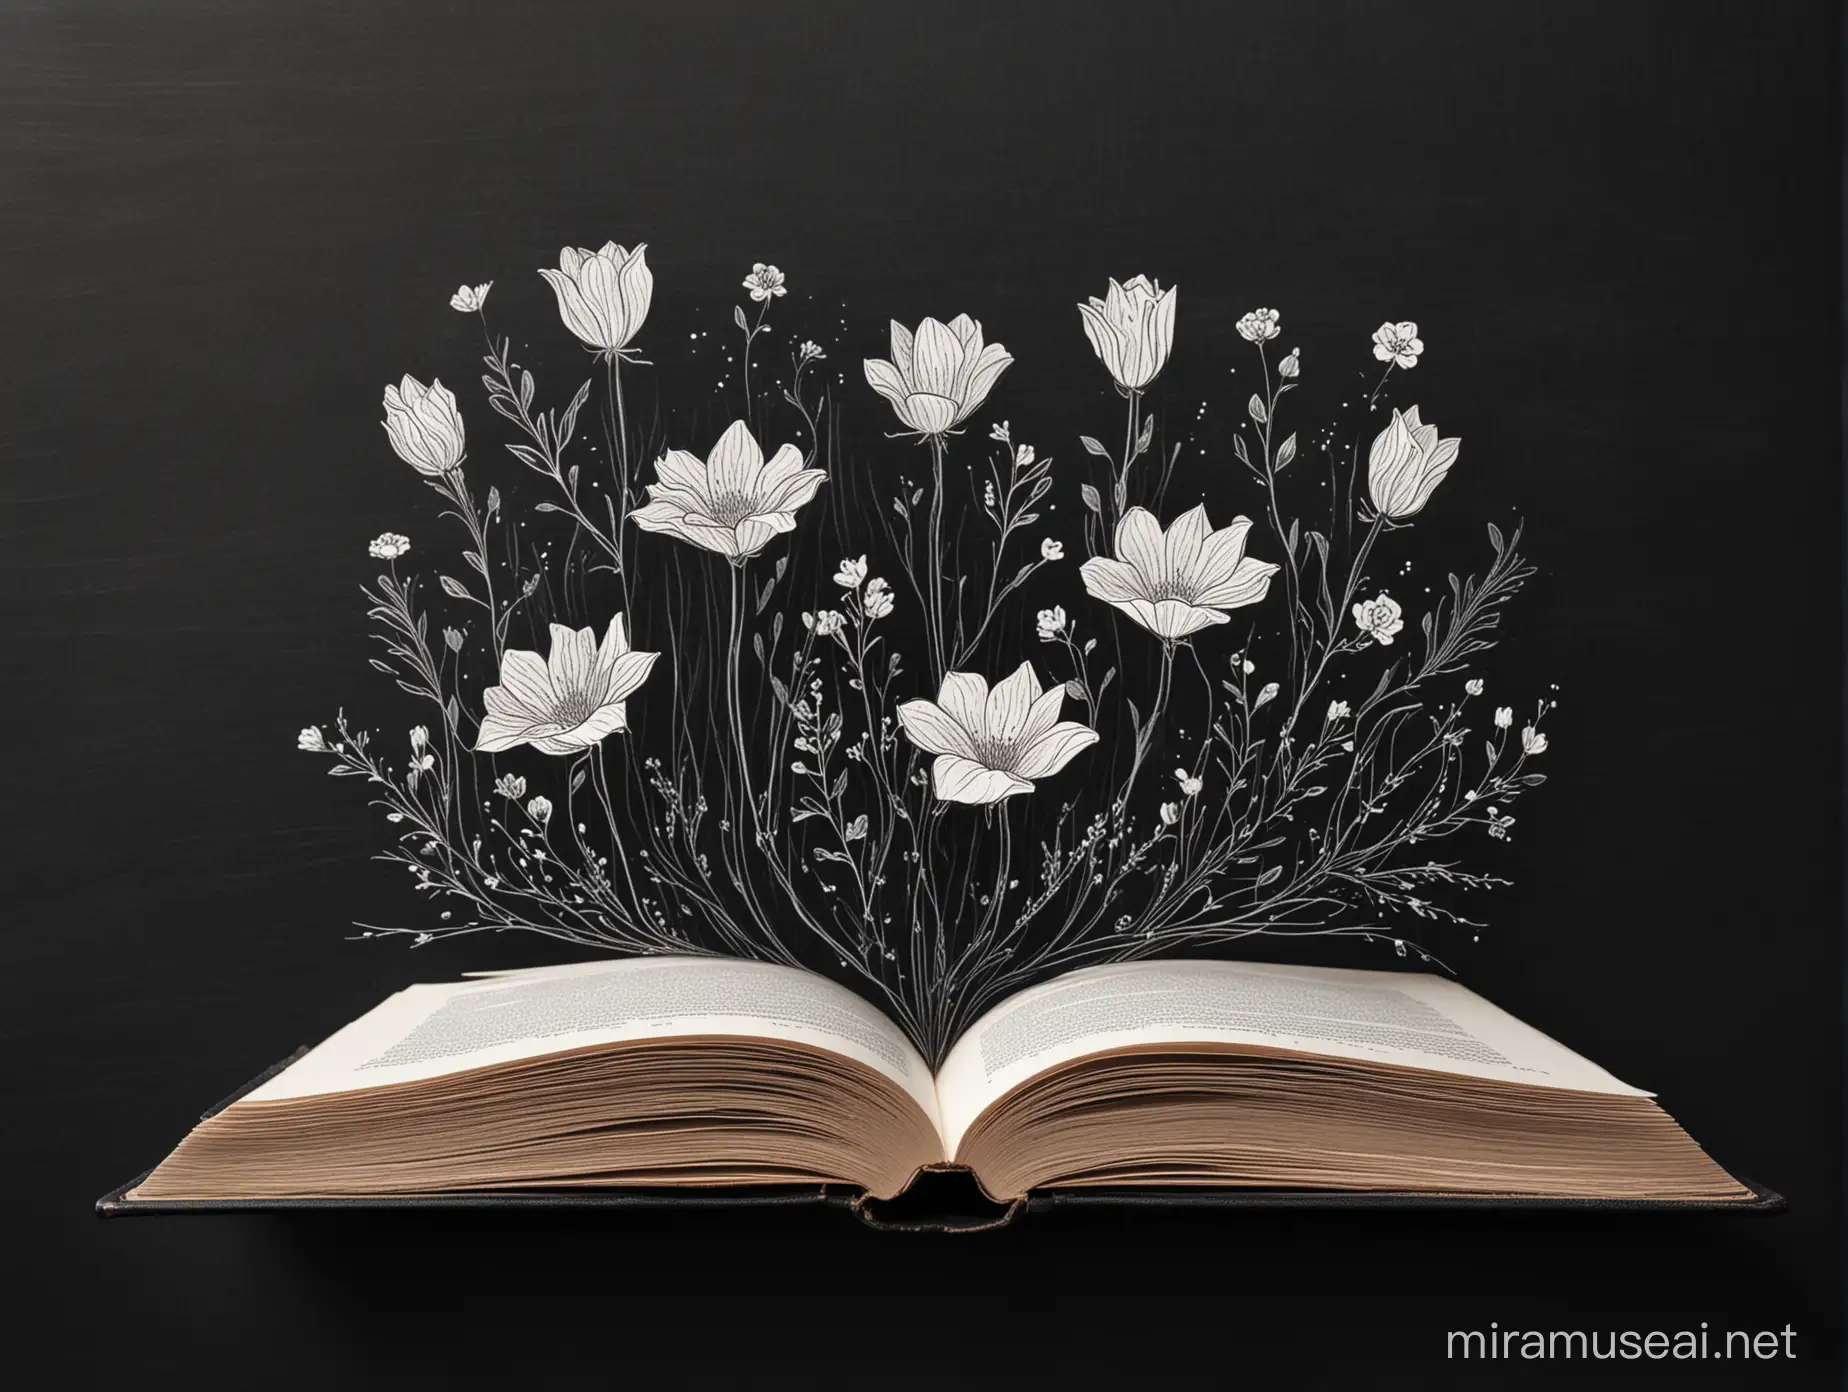 Minimalistic Open Book with White Line Flowers on Dark Background